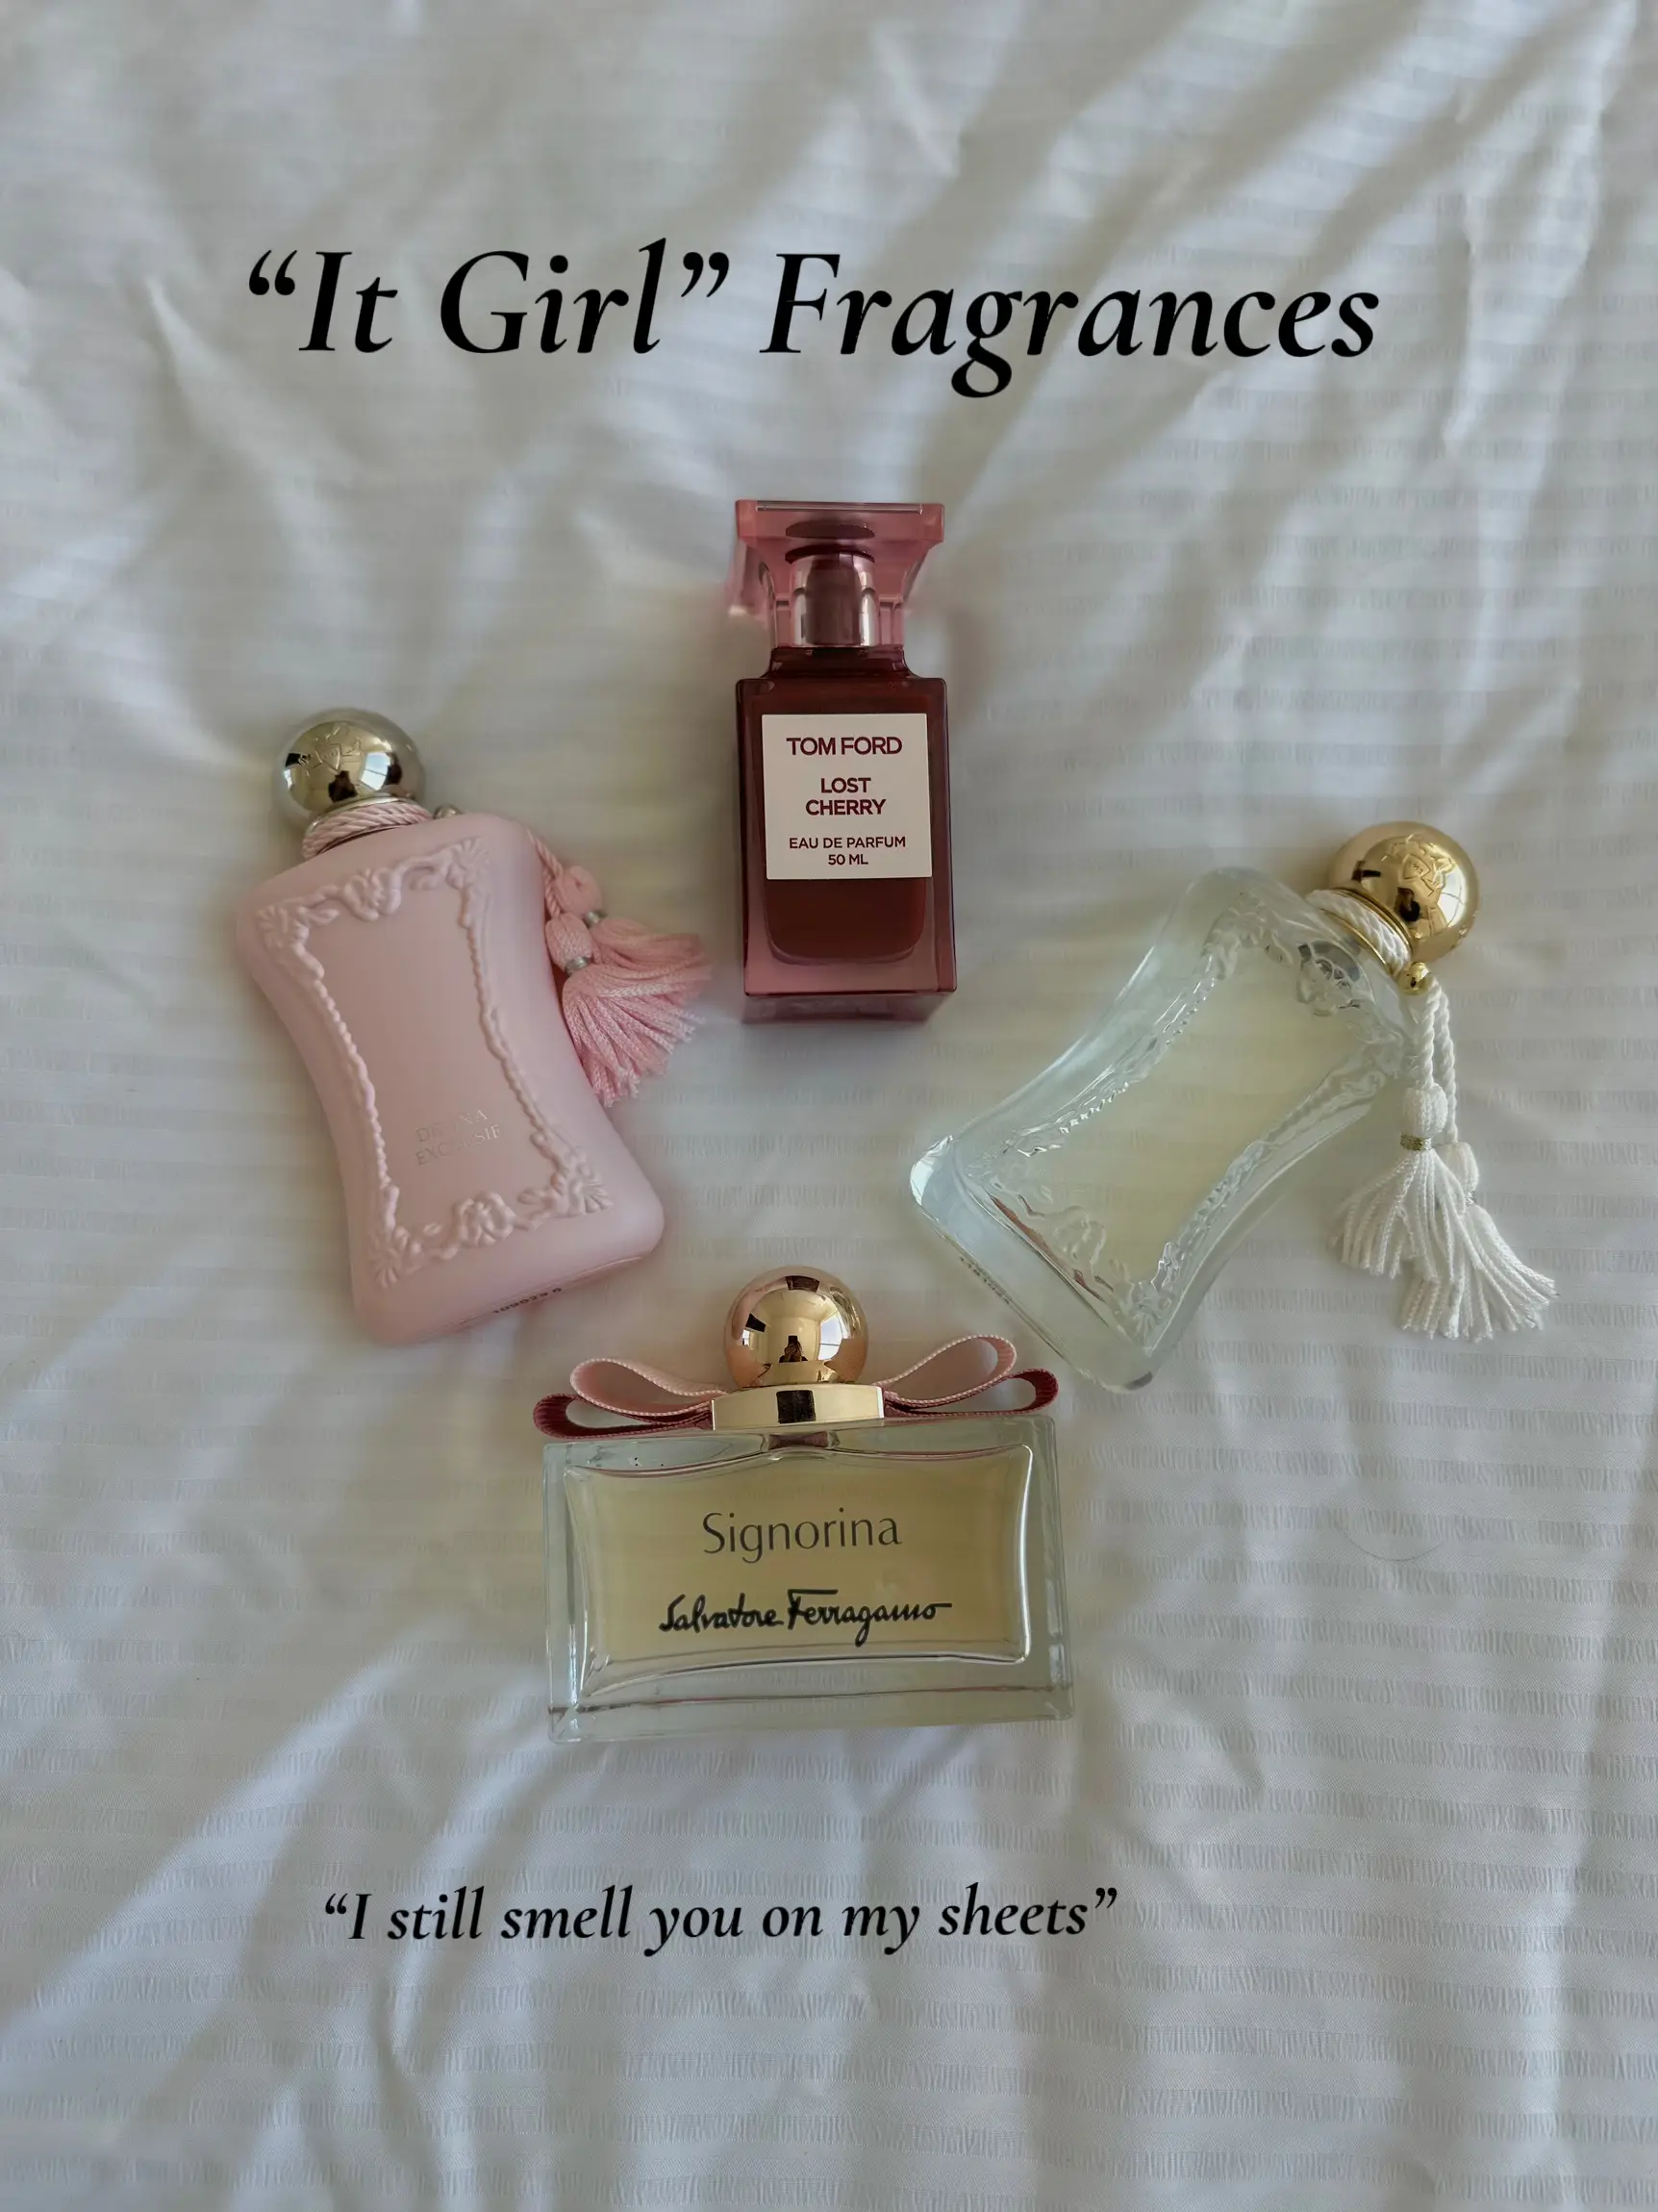 How to smell like an “it girl”, Gallery posted by ❥𝐸